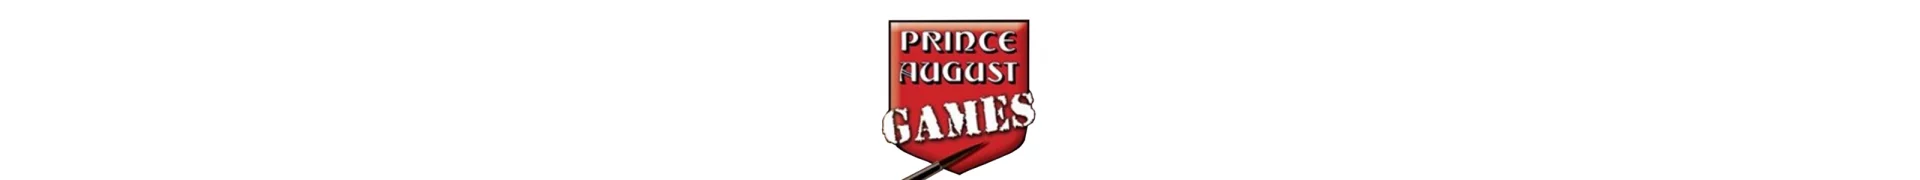 Prince August GAMES